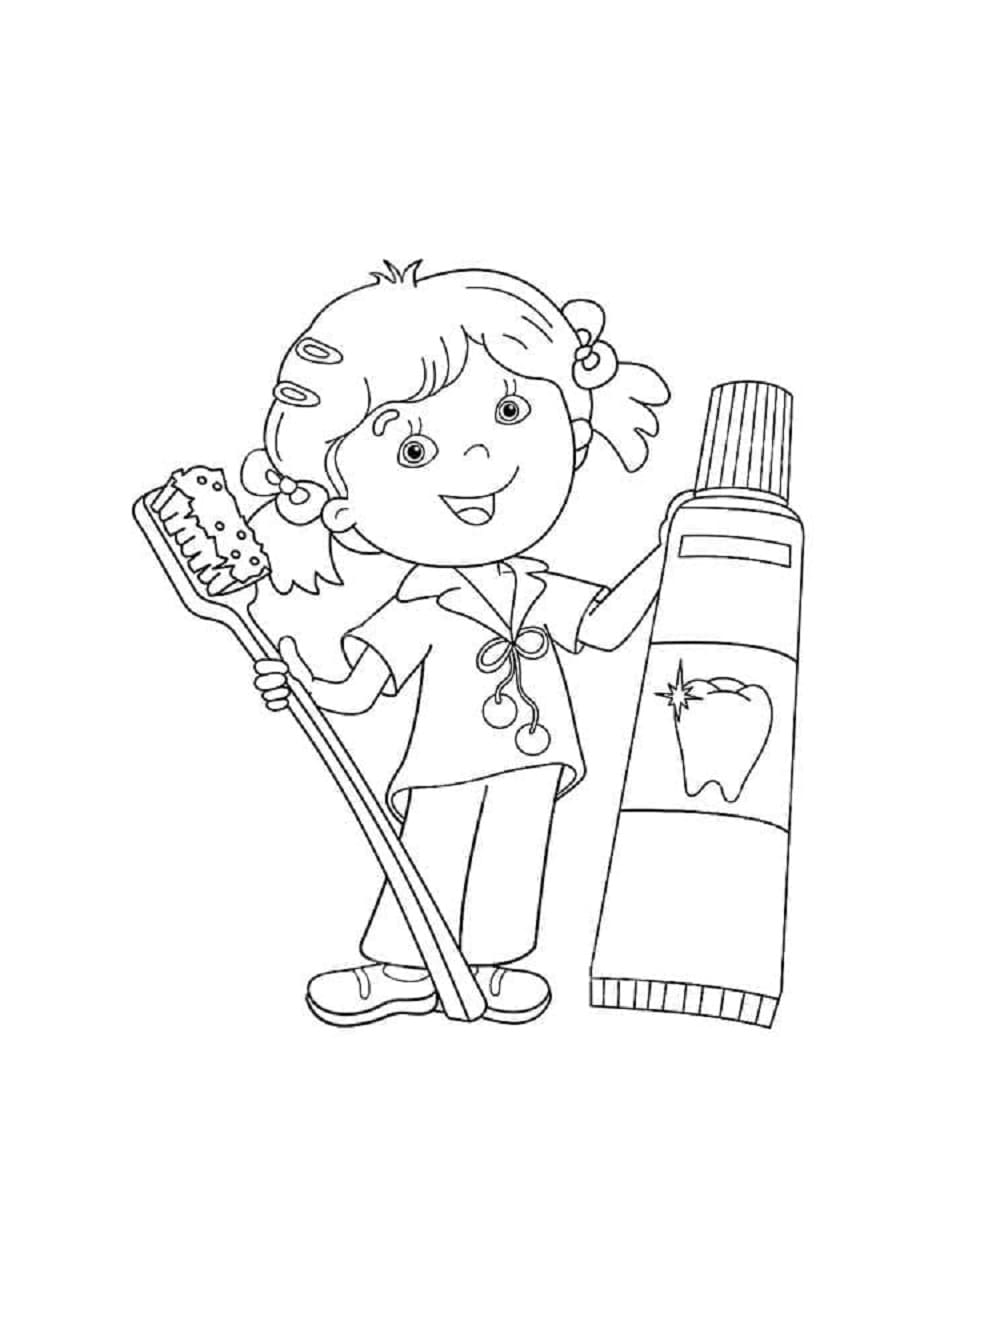 Printable Hygiene Girl With Toothbrush And Toothpaste Coloring Page